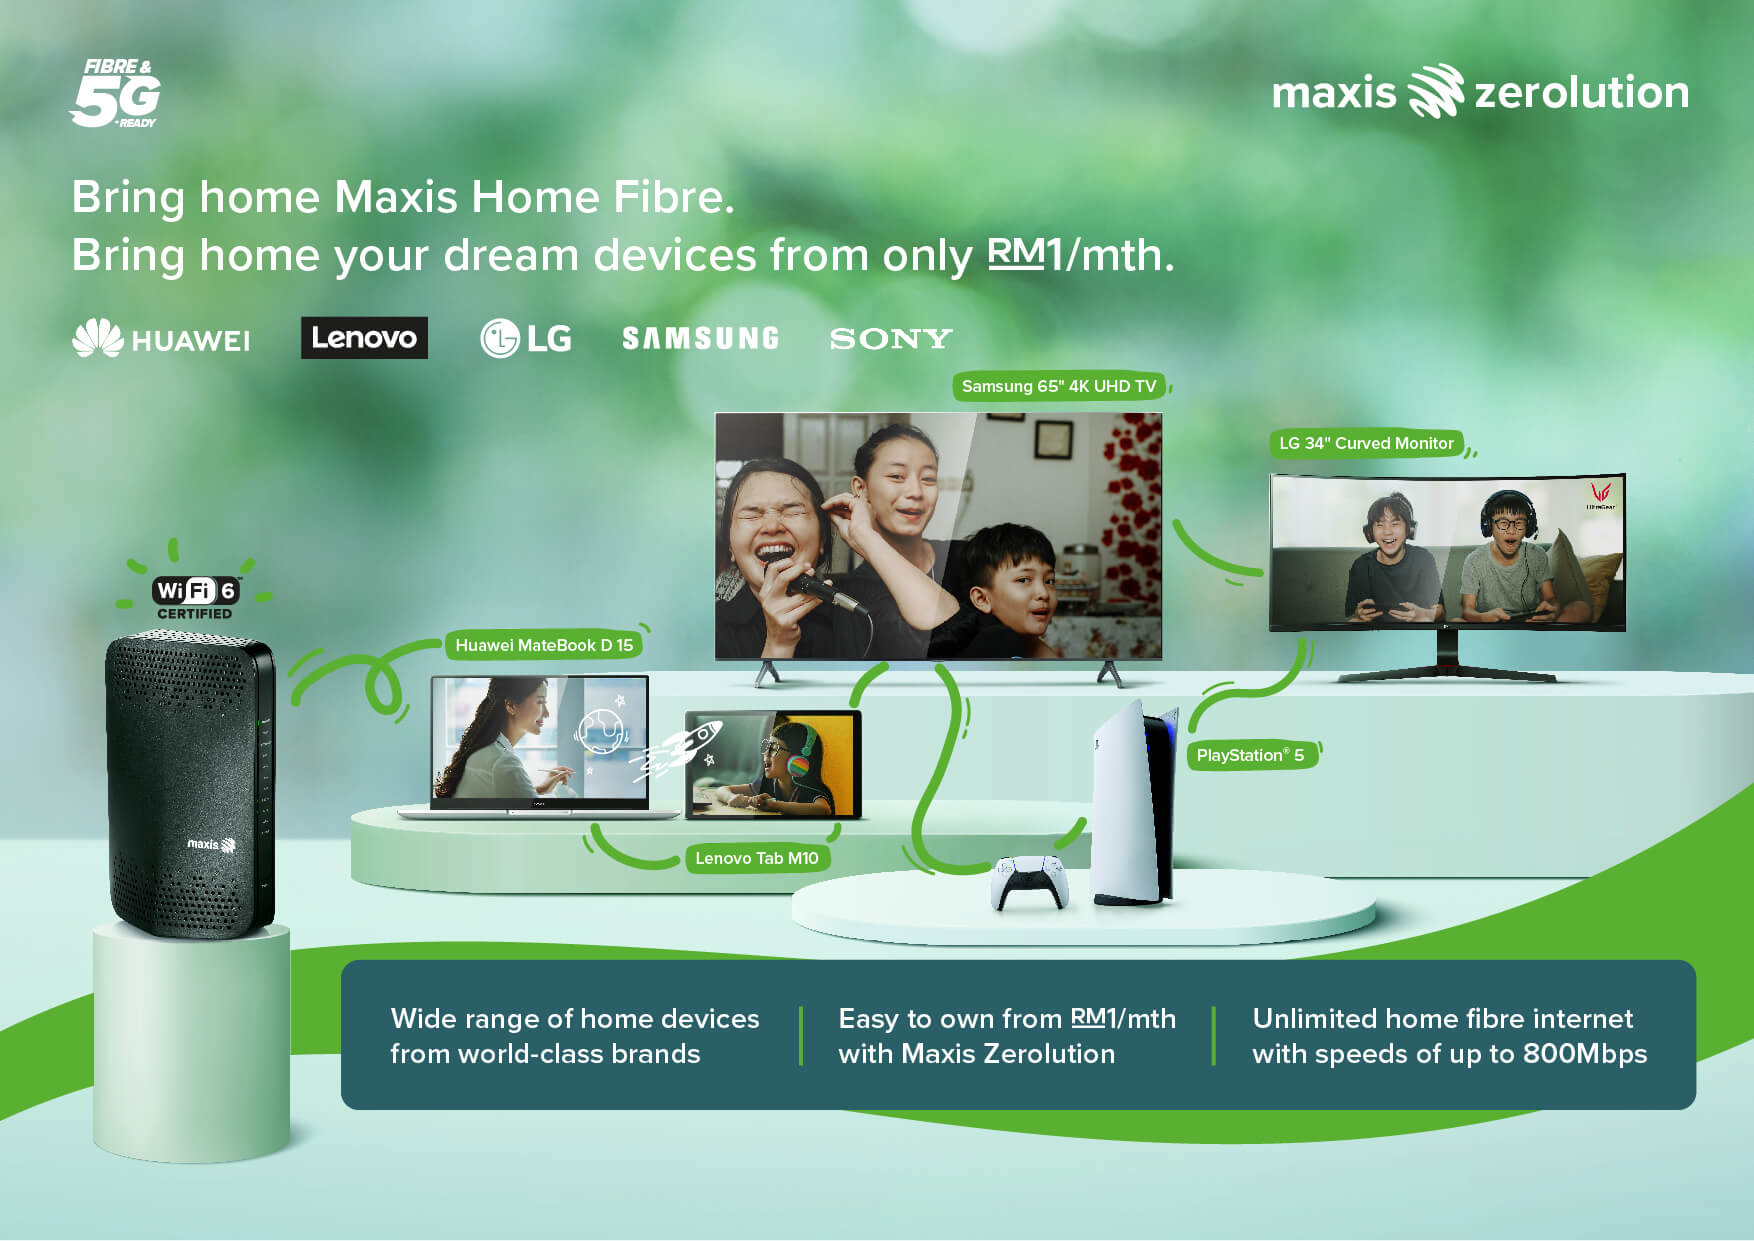 ​​Maxis customers can choose home devices from RM1 per month